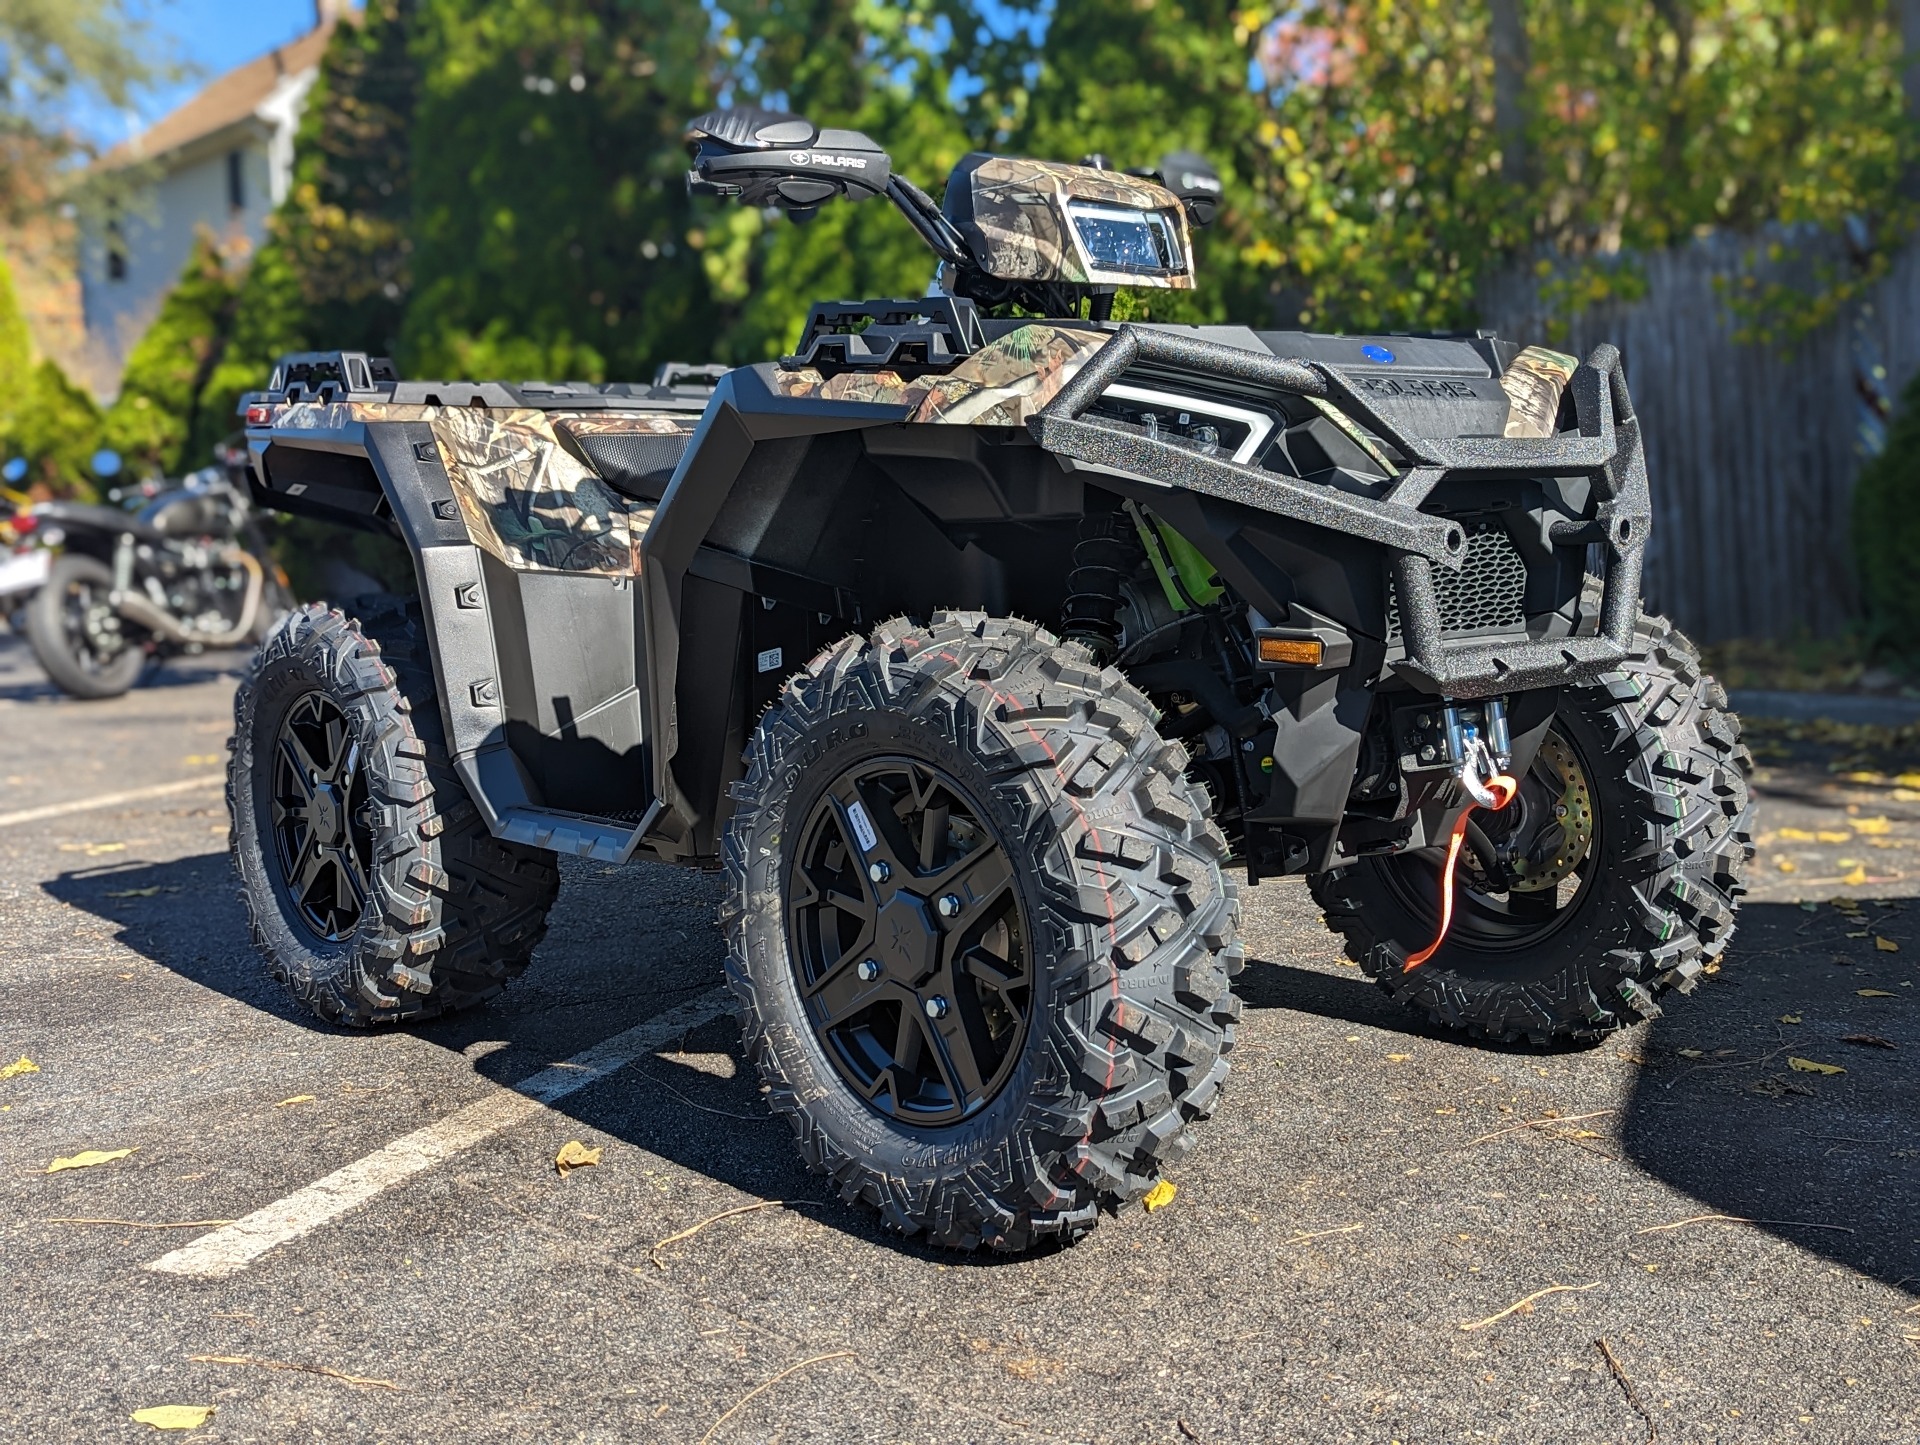 2023 Polaris Sportsman 850 Ultimate Trail in Mahwah, New Jersey - Photo 1